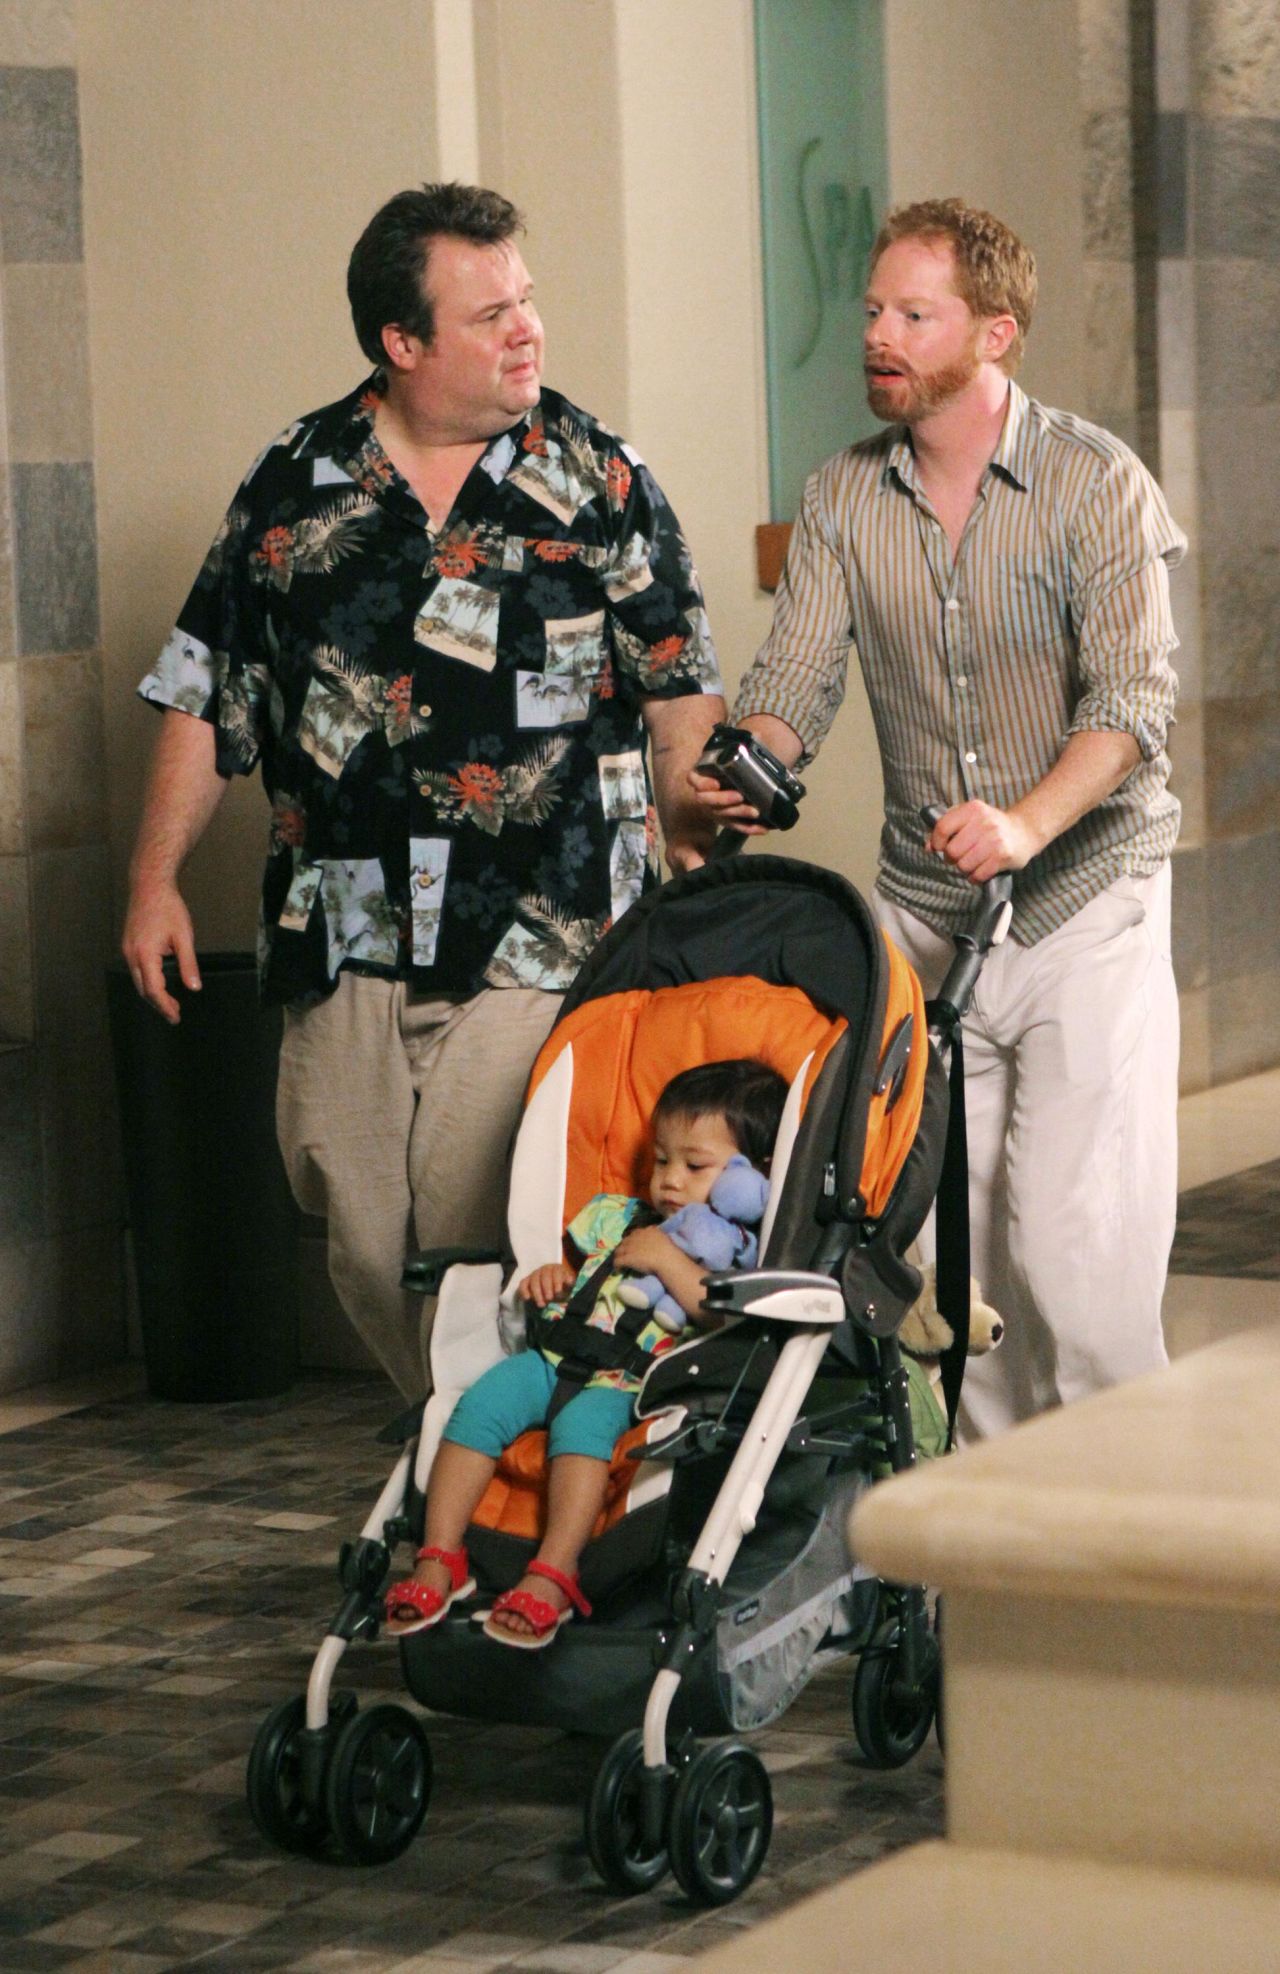 Mitchell Pritchett (Jesse Tyler Ferguson, right) and Cameron Tucker (Eric Stonestreet) adopted a baby girl named Lily on the pilot episode of "Modern Family" in 2009. The pair made plans to adopt another child during the third season of the ABC show.